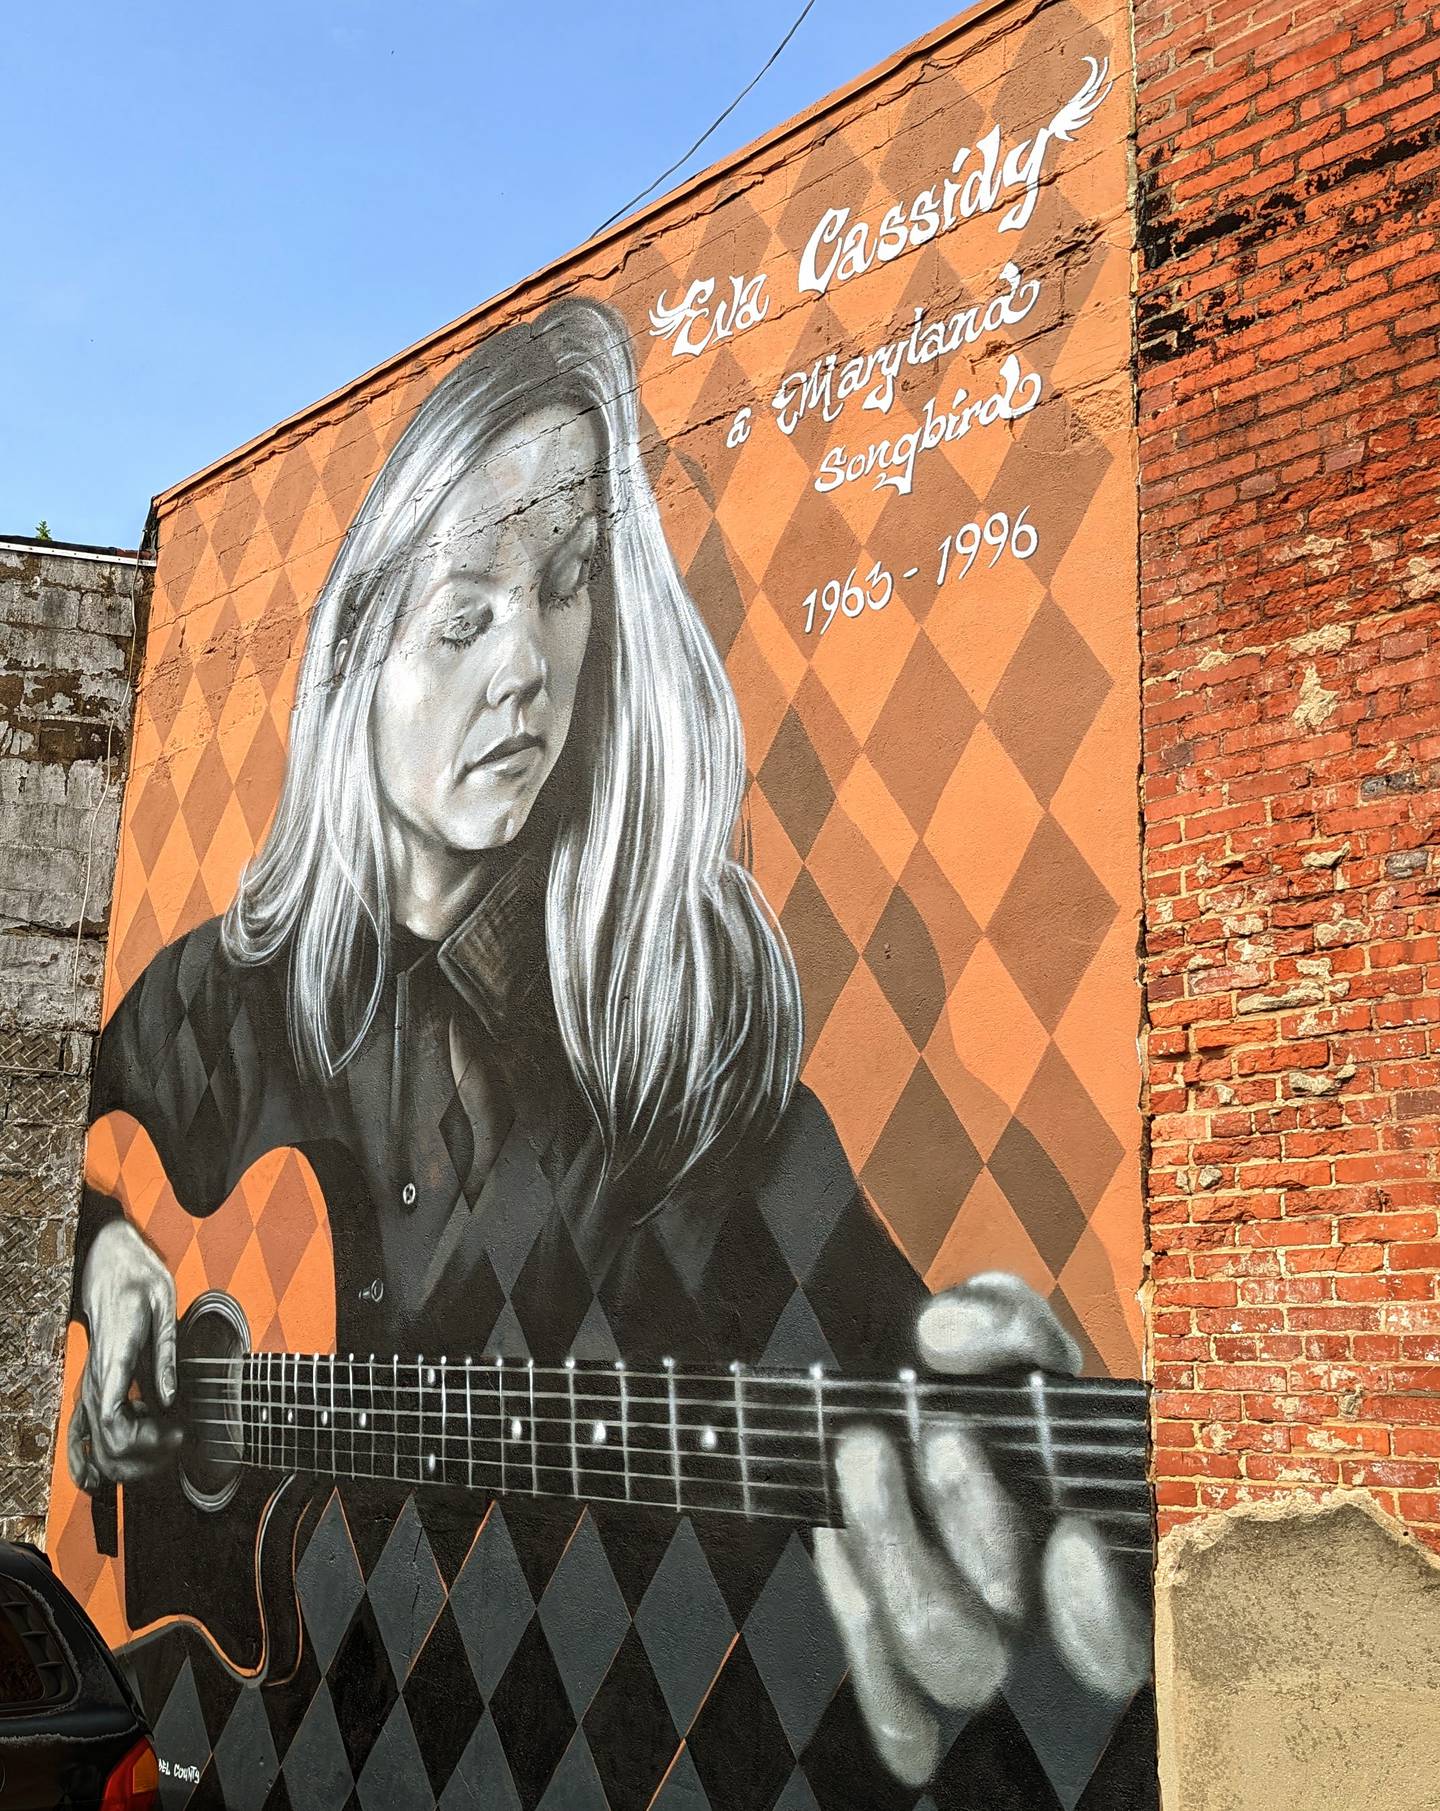 Eva Cassidy, the late Maryland singer who frequently performed in Annapolis until her death from cancer at age 33 in 1996, remains a powerful figure for many.